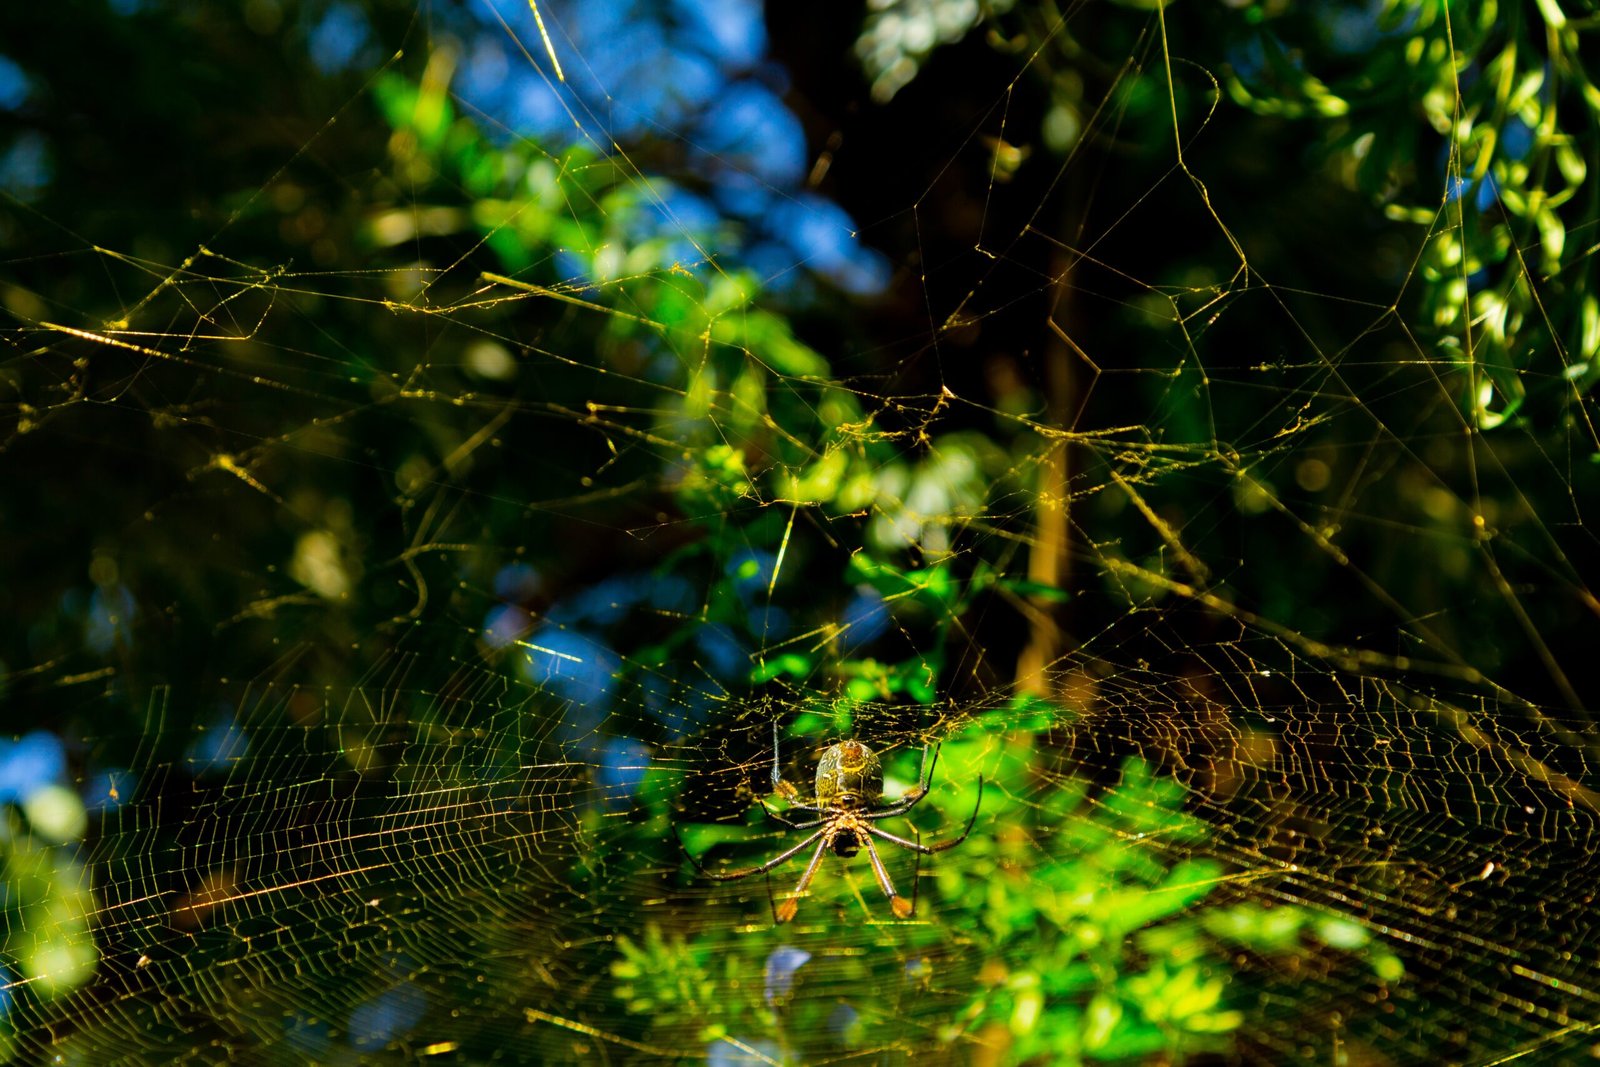 Can You Discuss The Characteristics And Care Requirements Of The Elusive Golden Orb-weaver Spider?